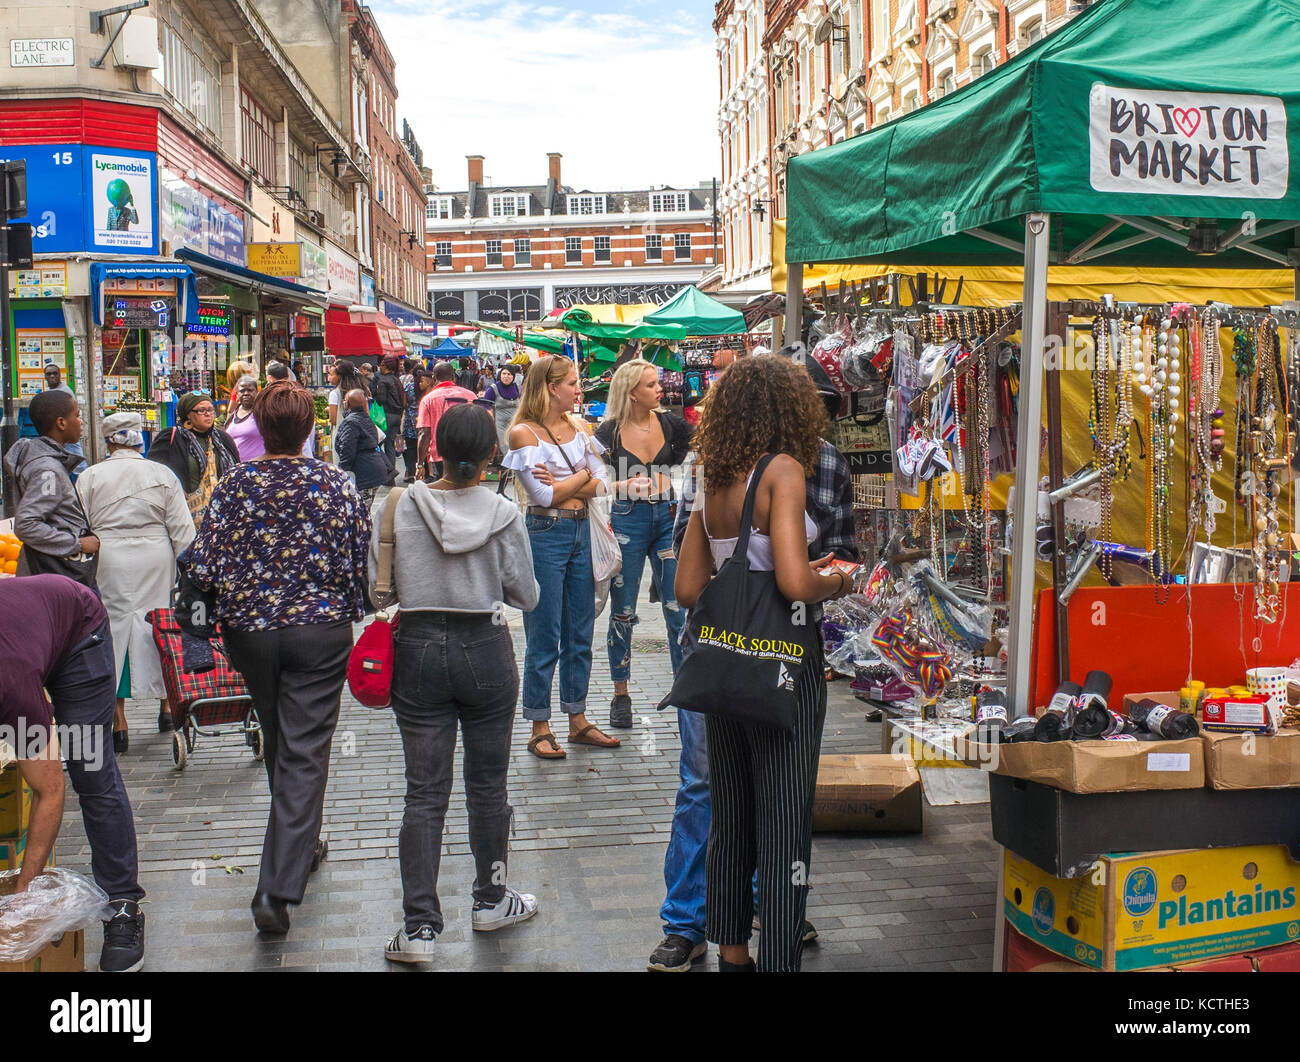 Busy and vibrant Brixton Market in fashionable area of south west London. Stock Photo